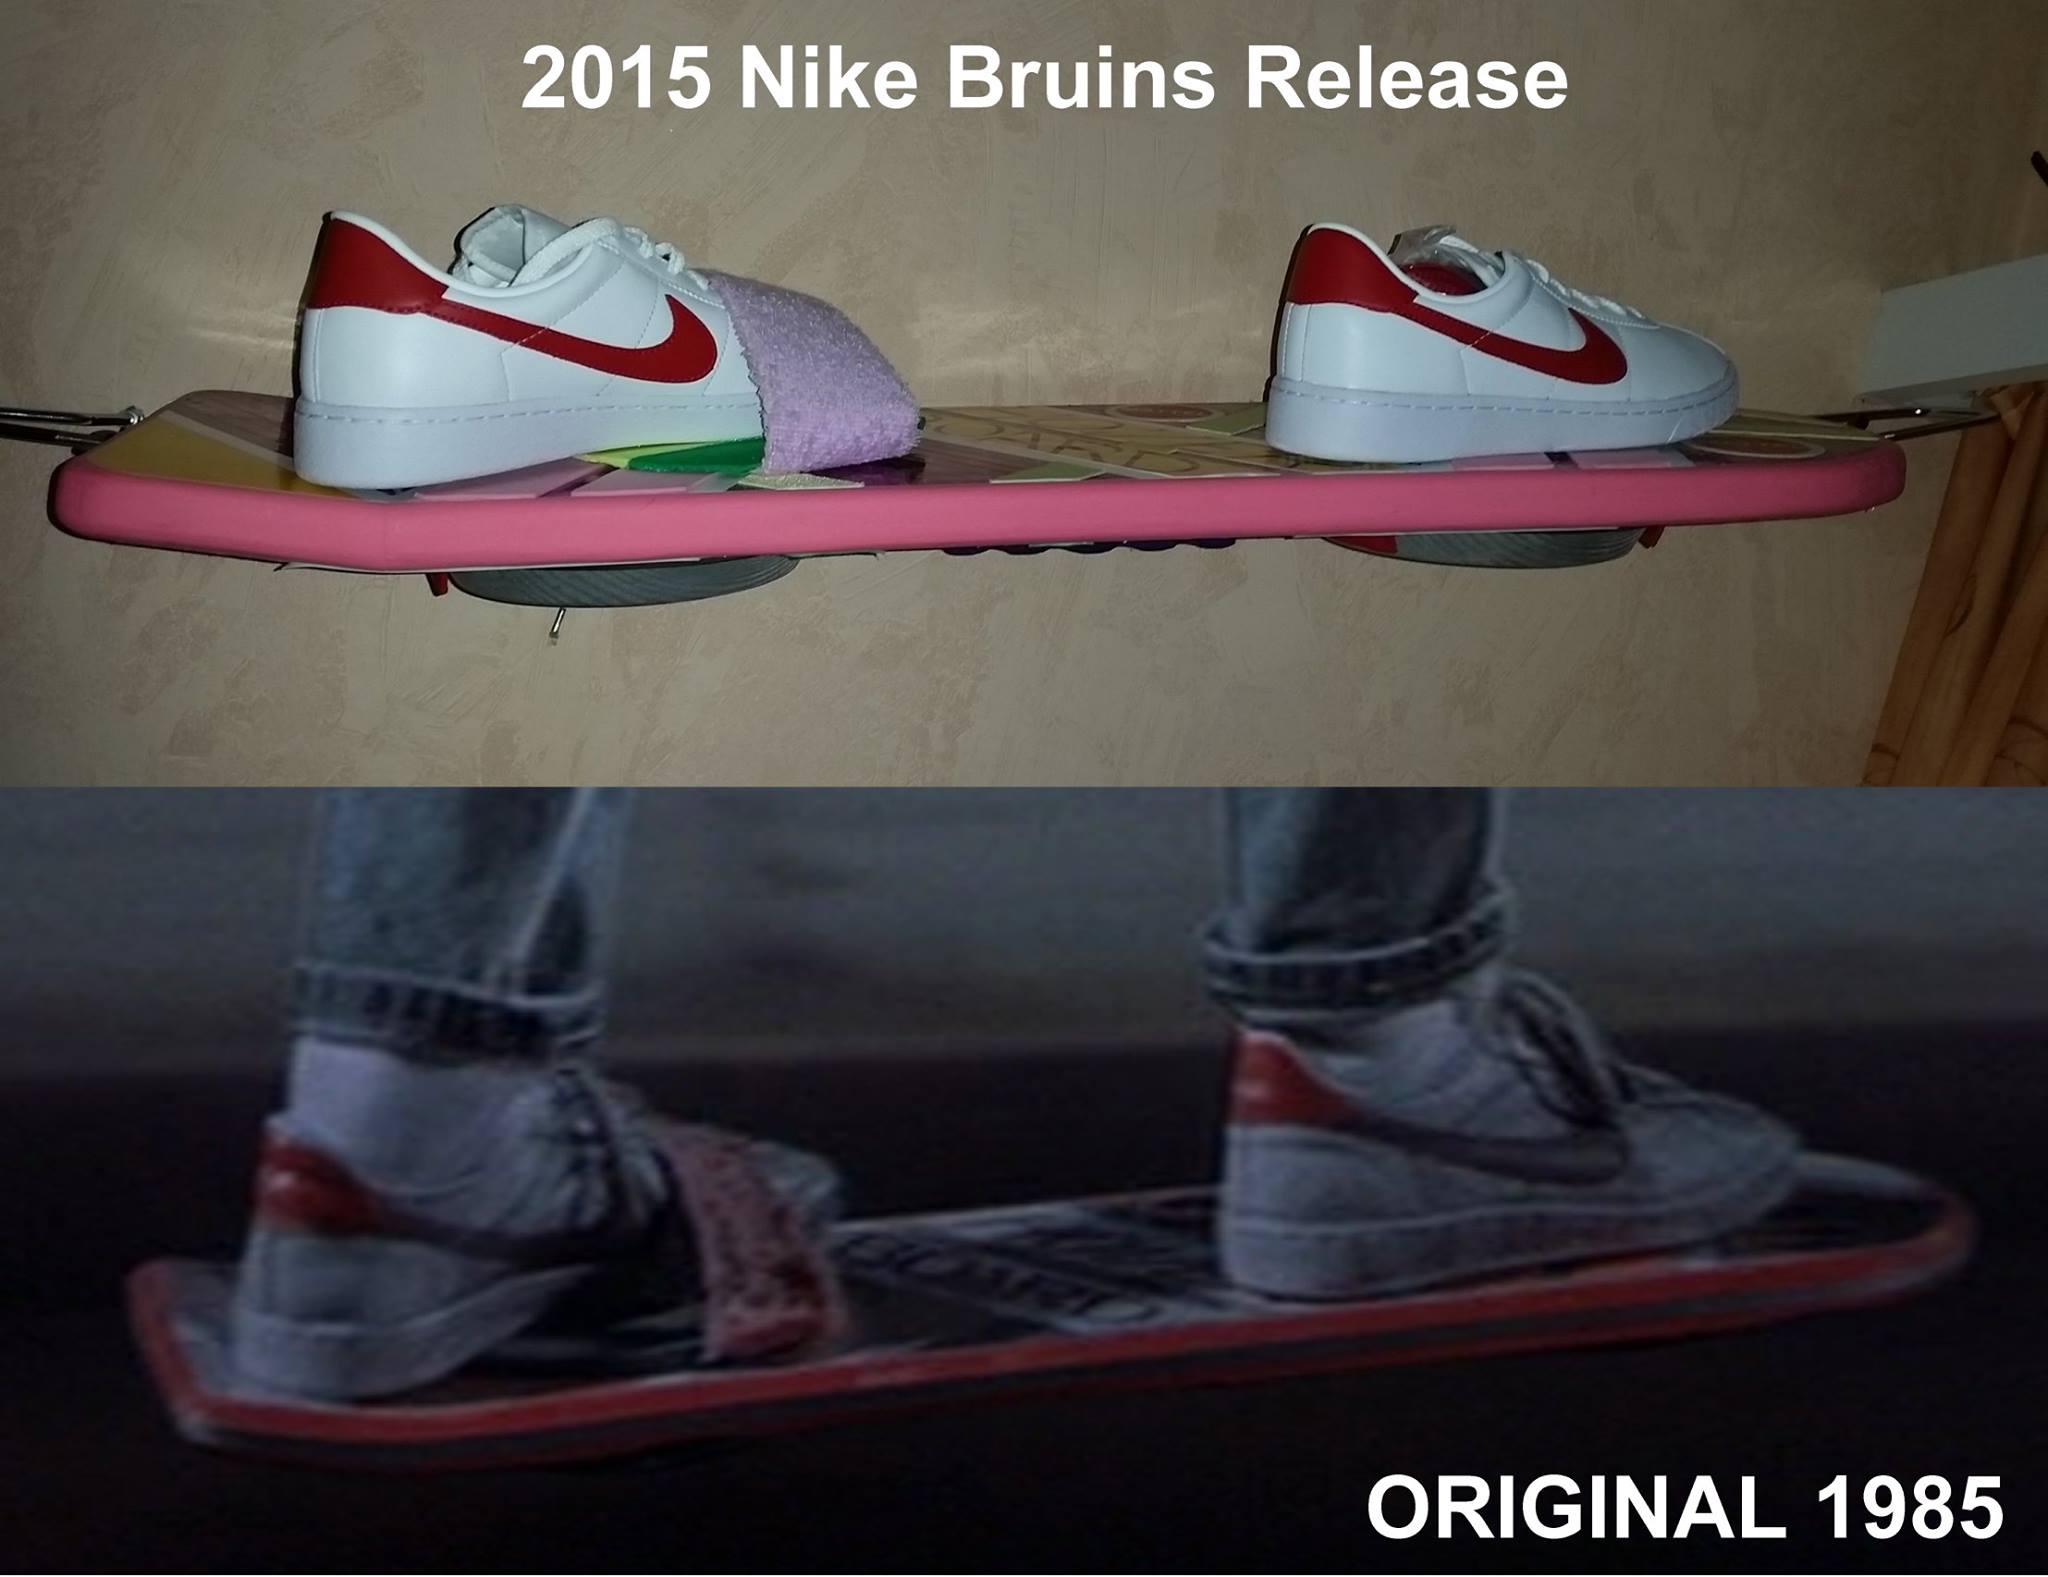 Nike releasing Marty McFly Bruins on 10/21 | Page 14 | RPF Costume and Prop  Maker Community